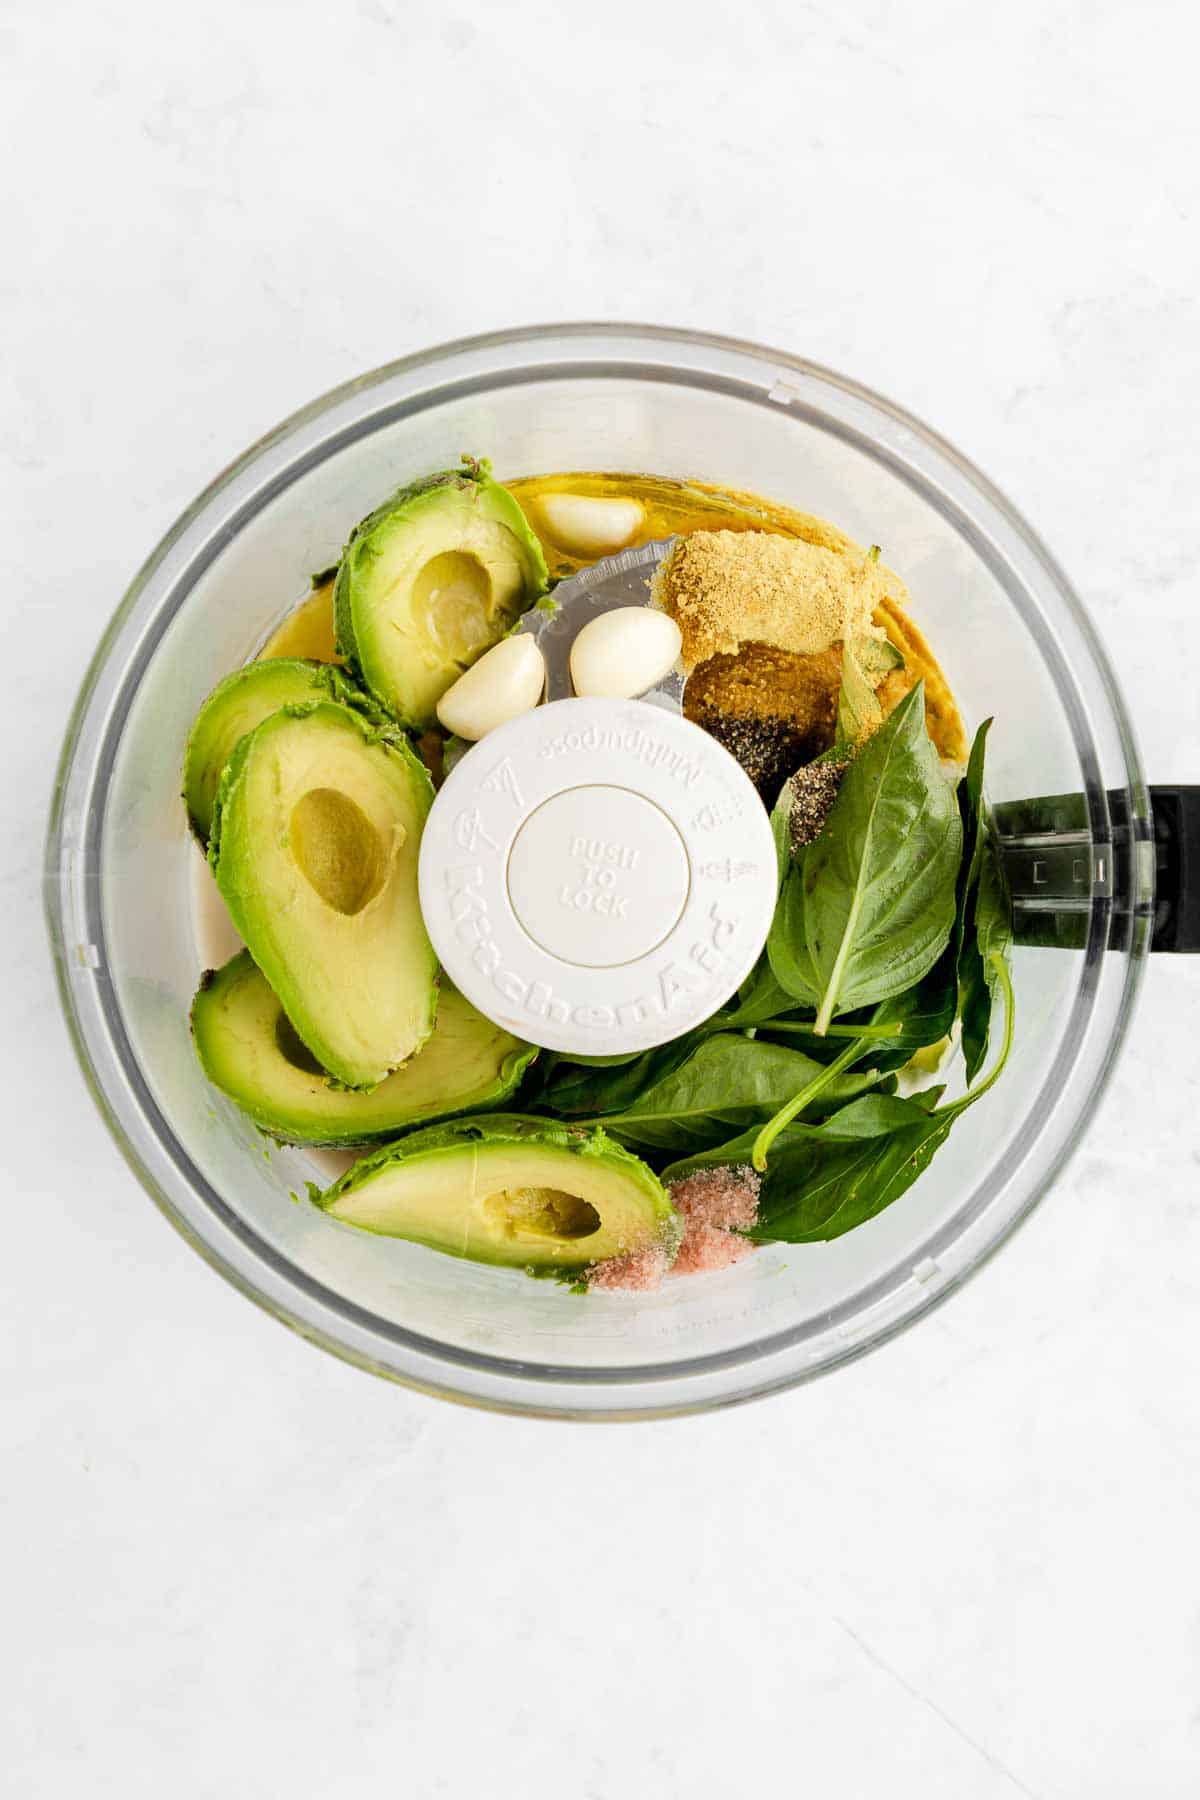 avocados, basil, nutritional yeast, garlic, and olive oil in a food processor